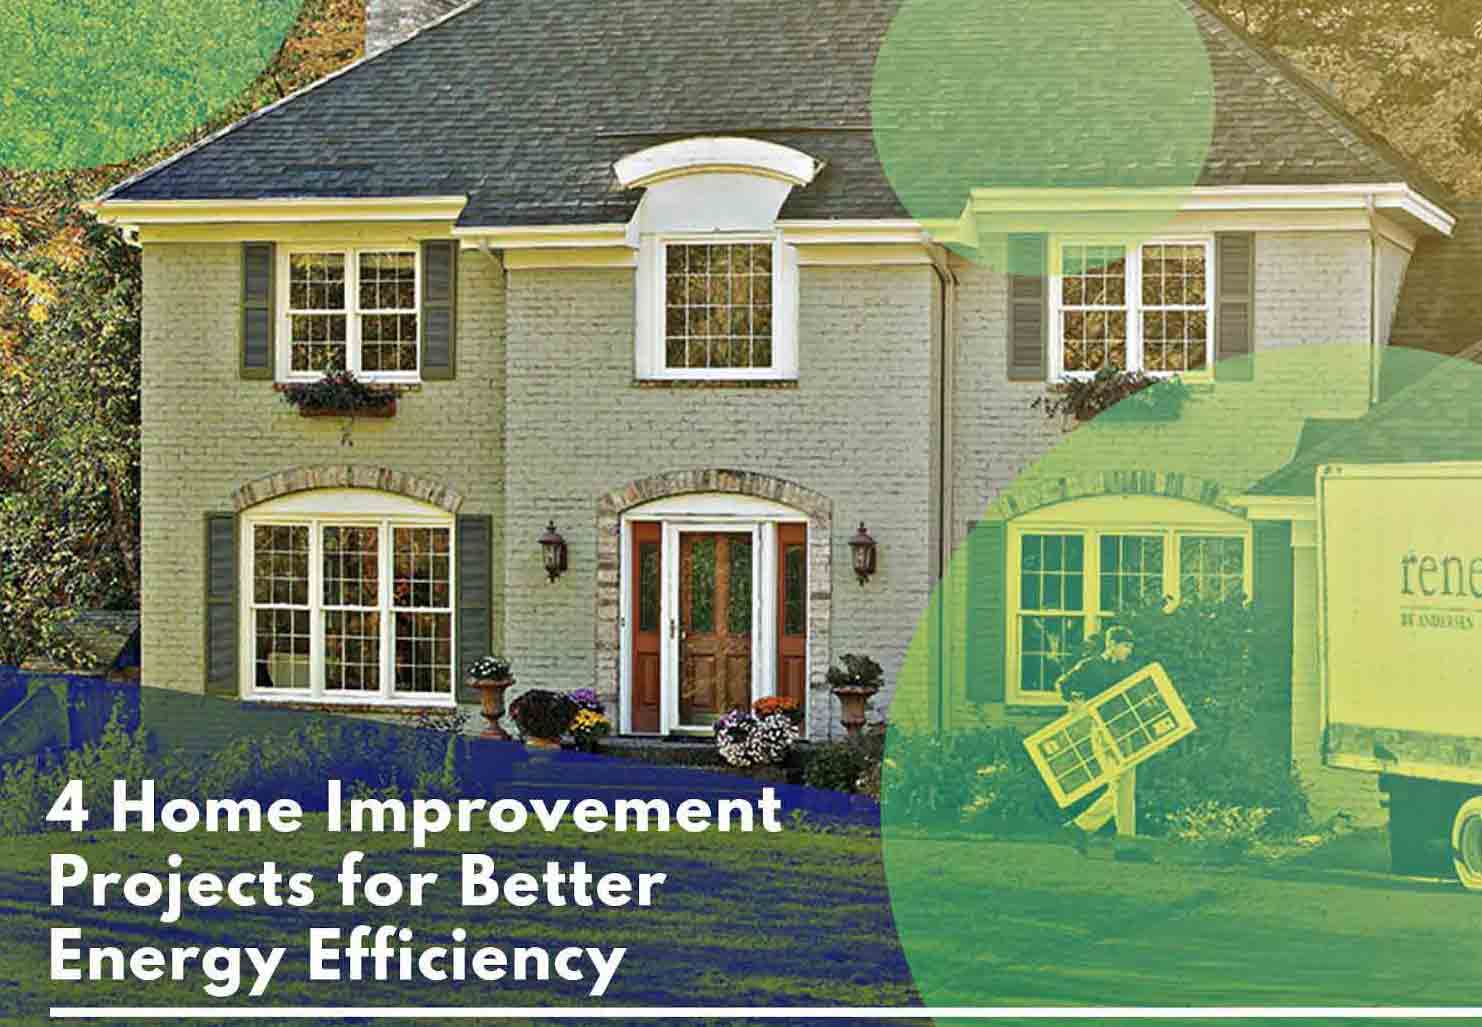 4 Home Improvement Projects for Better Energy Efficiency